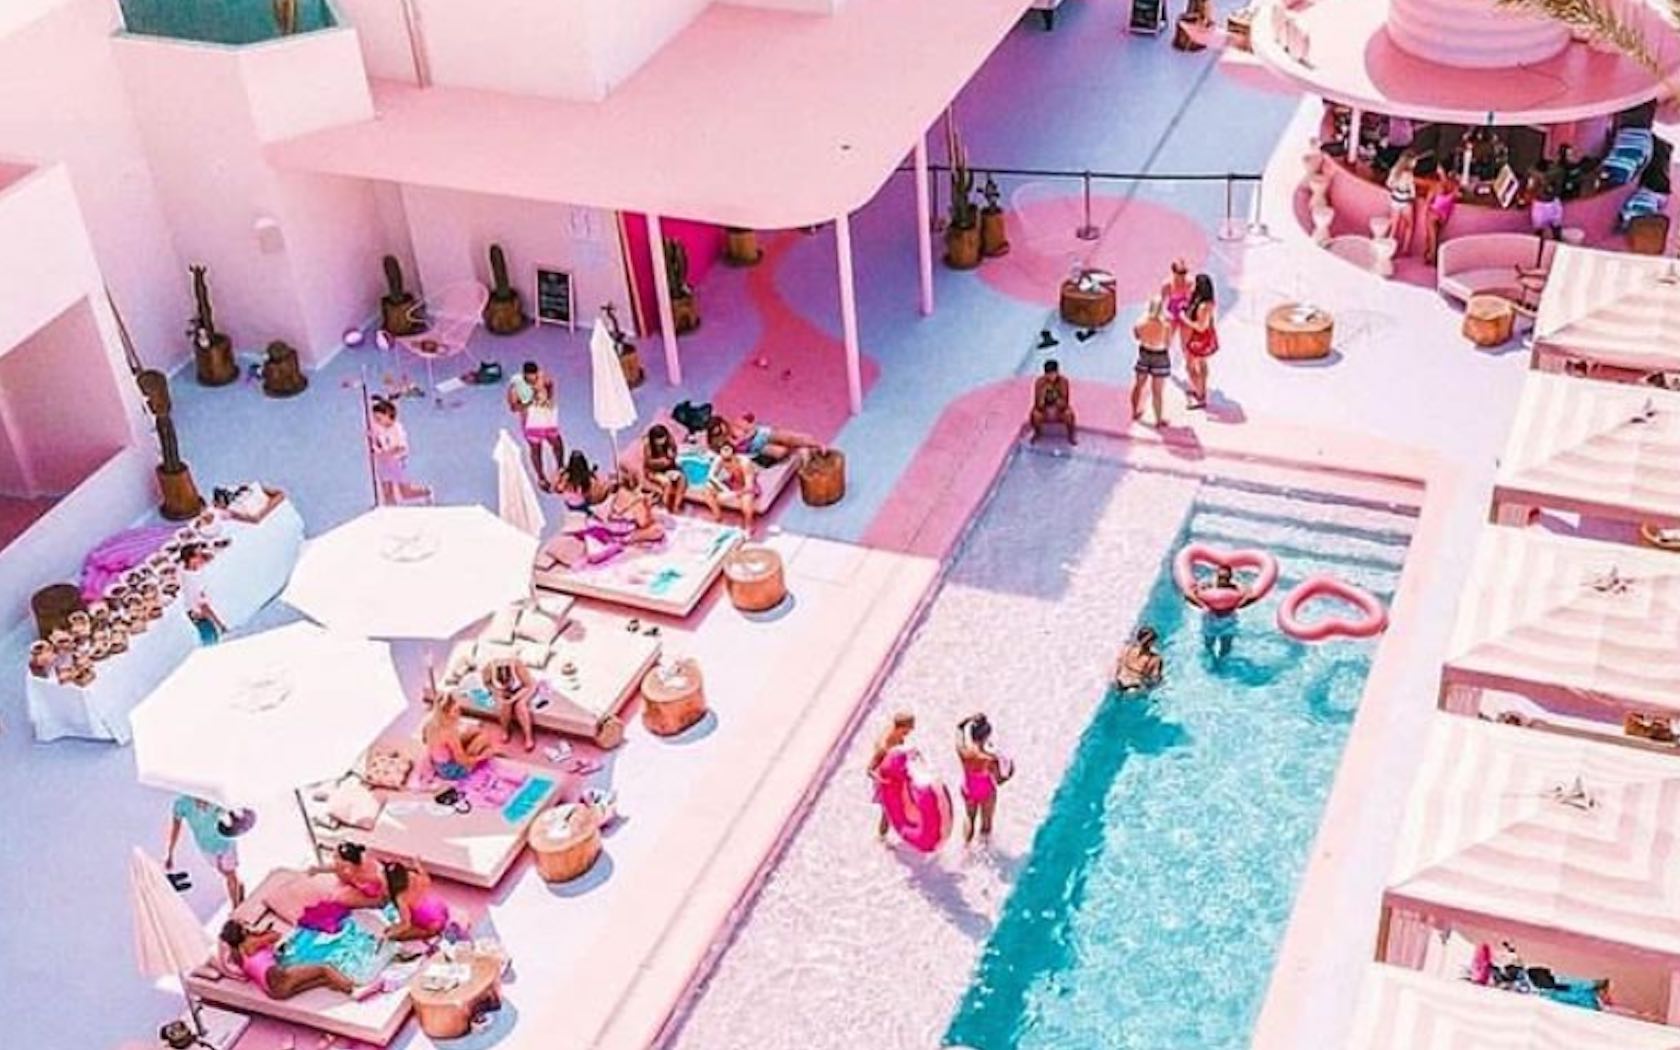 Pool area in pink tones